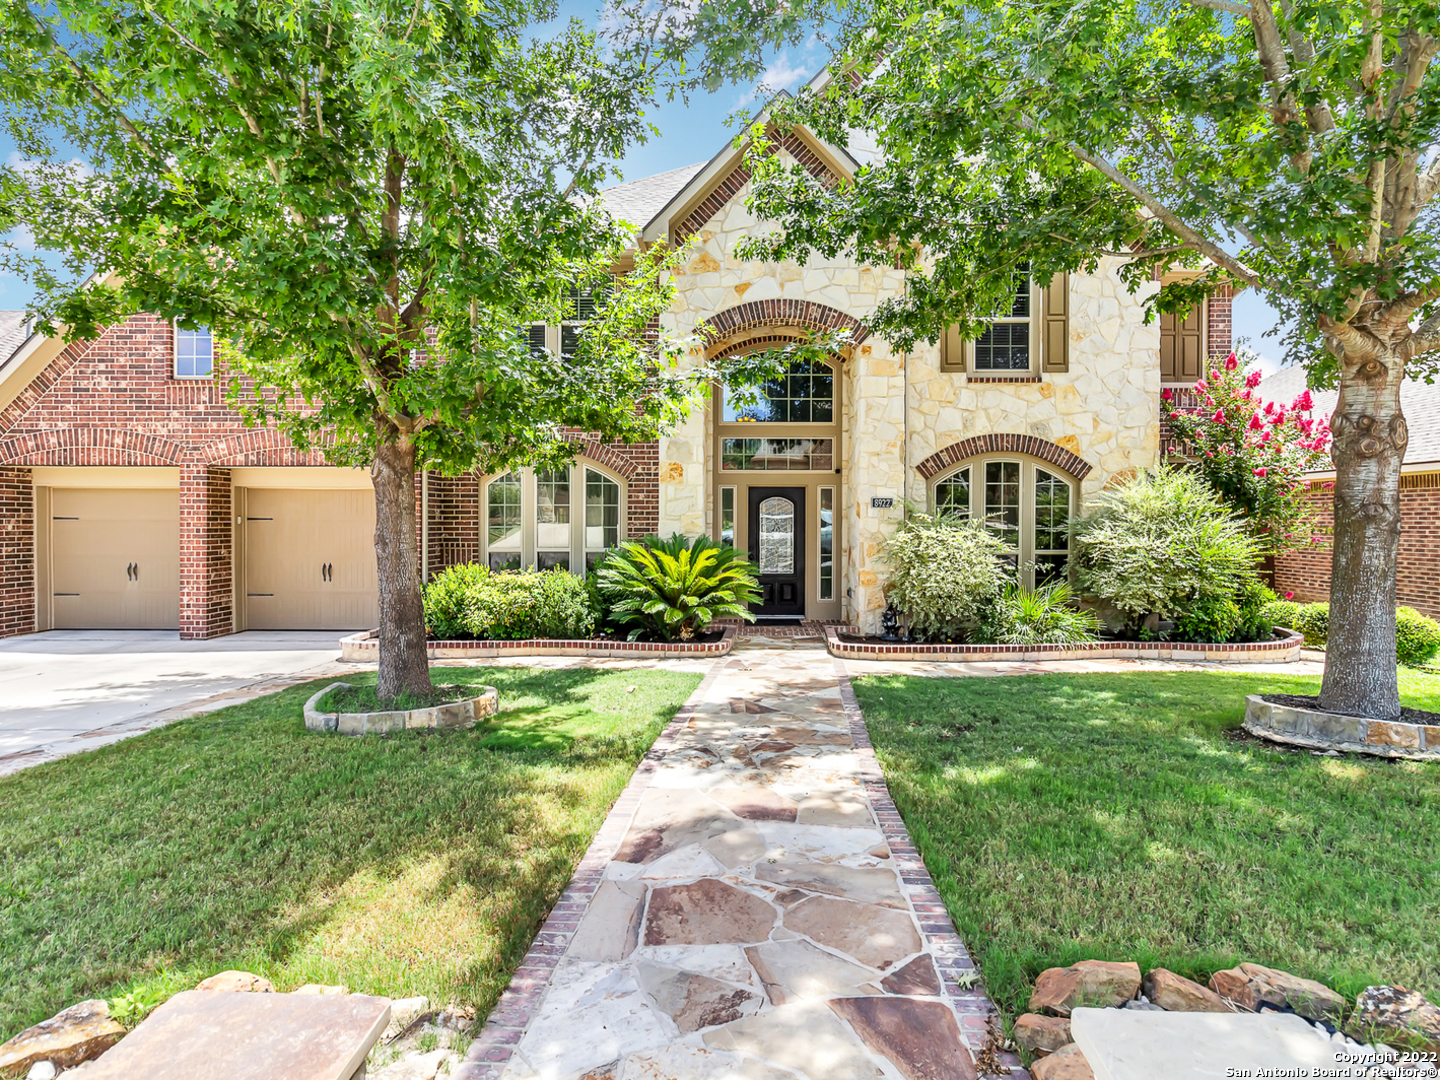 !!!MOTIVATED SELLER- Relocation!!! This stunning 5bd/4.5bth Perry home is located in the sought after River Rock Ranch neighborhood. Home boasts spacious living space with high ceilings, an abundance of natural light and oversized windows. Both the interior and exterior space are perfect for family fun and entertaining. Downstairs offers a large primary bedroom with a full bathroom and 2 closets, a guest bedroom with a full bath plus a half bath in the hallway. Upstairs has 3 large bedrooms, 2 full bathrooms, oversized game room and media room. Your private backyard includes a covered patio with an extended deck. NEW ROOF 2 YEARS AGO!